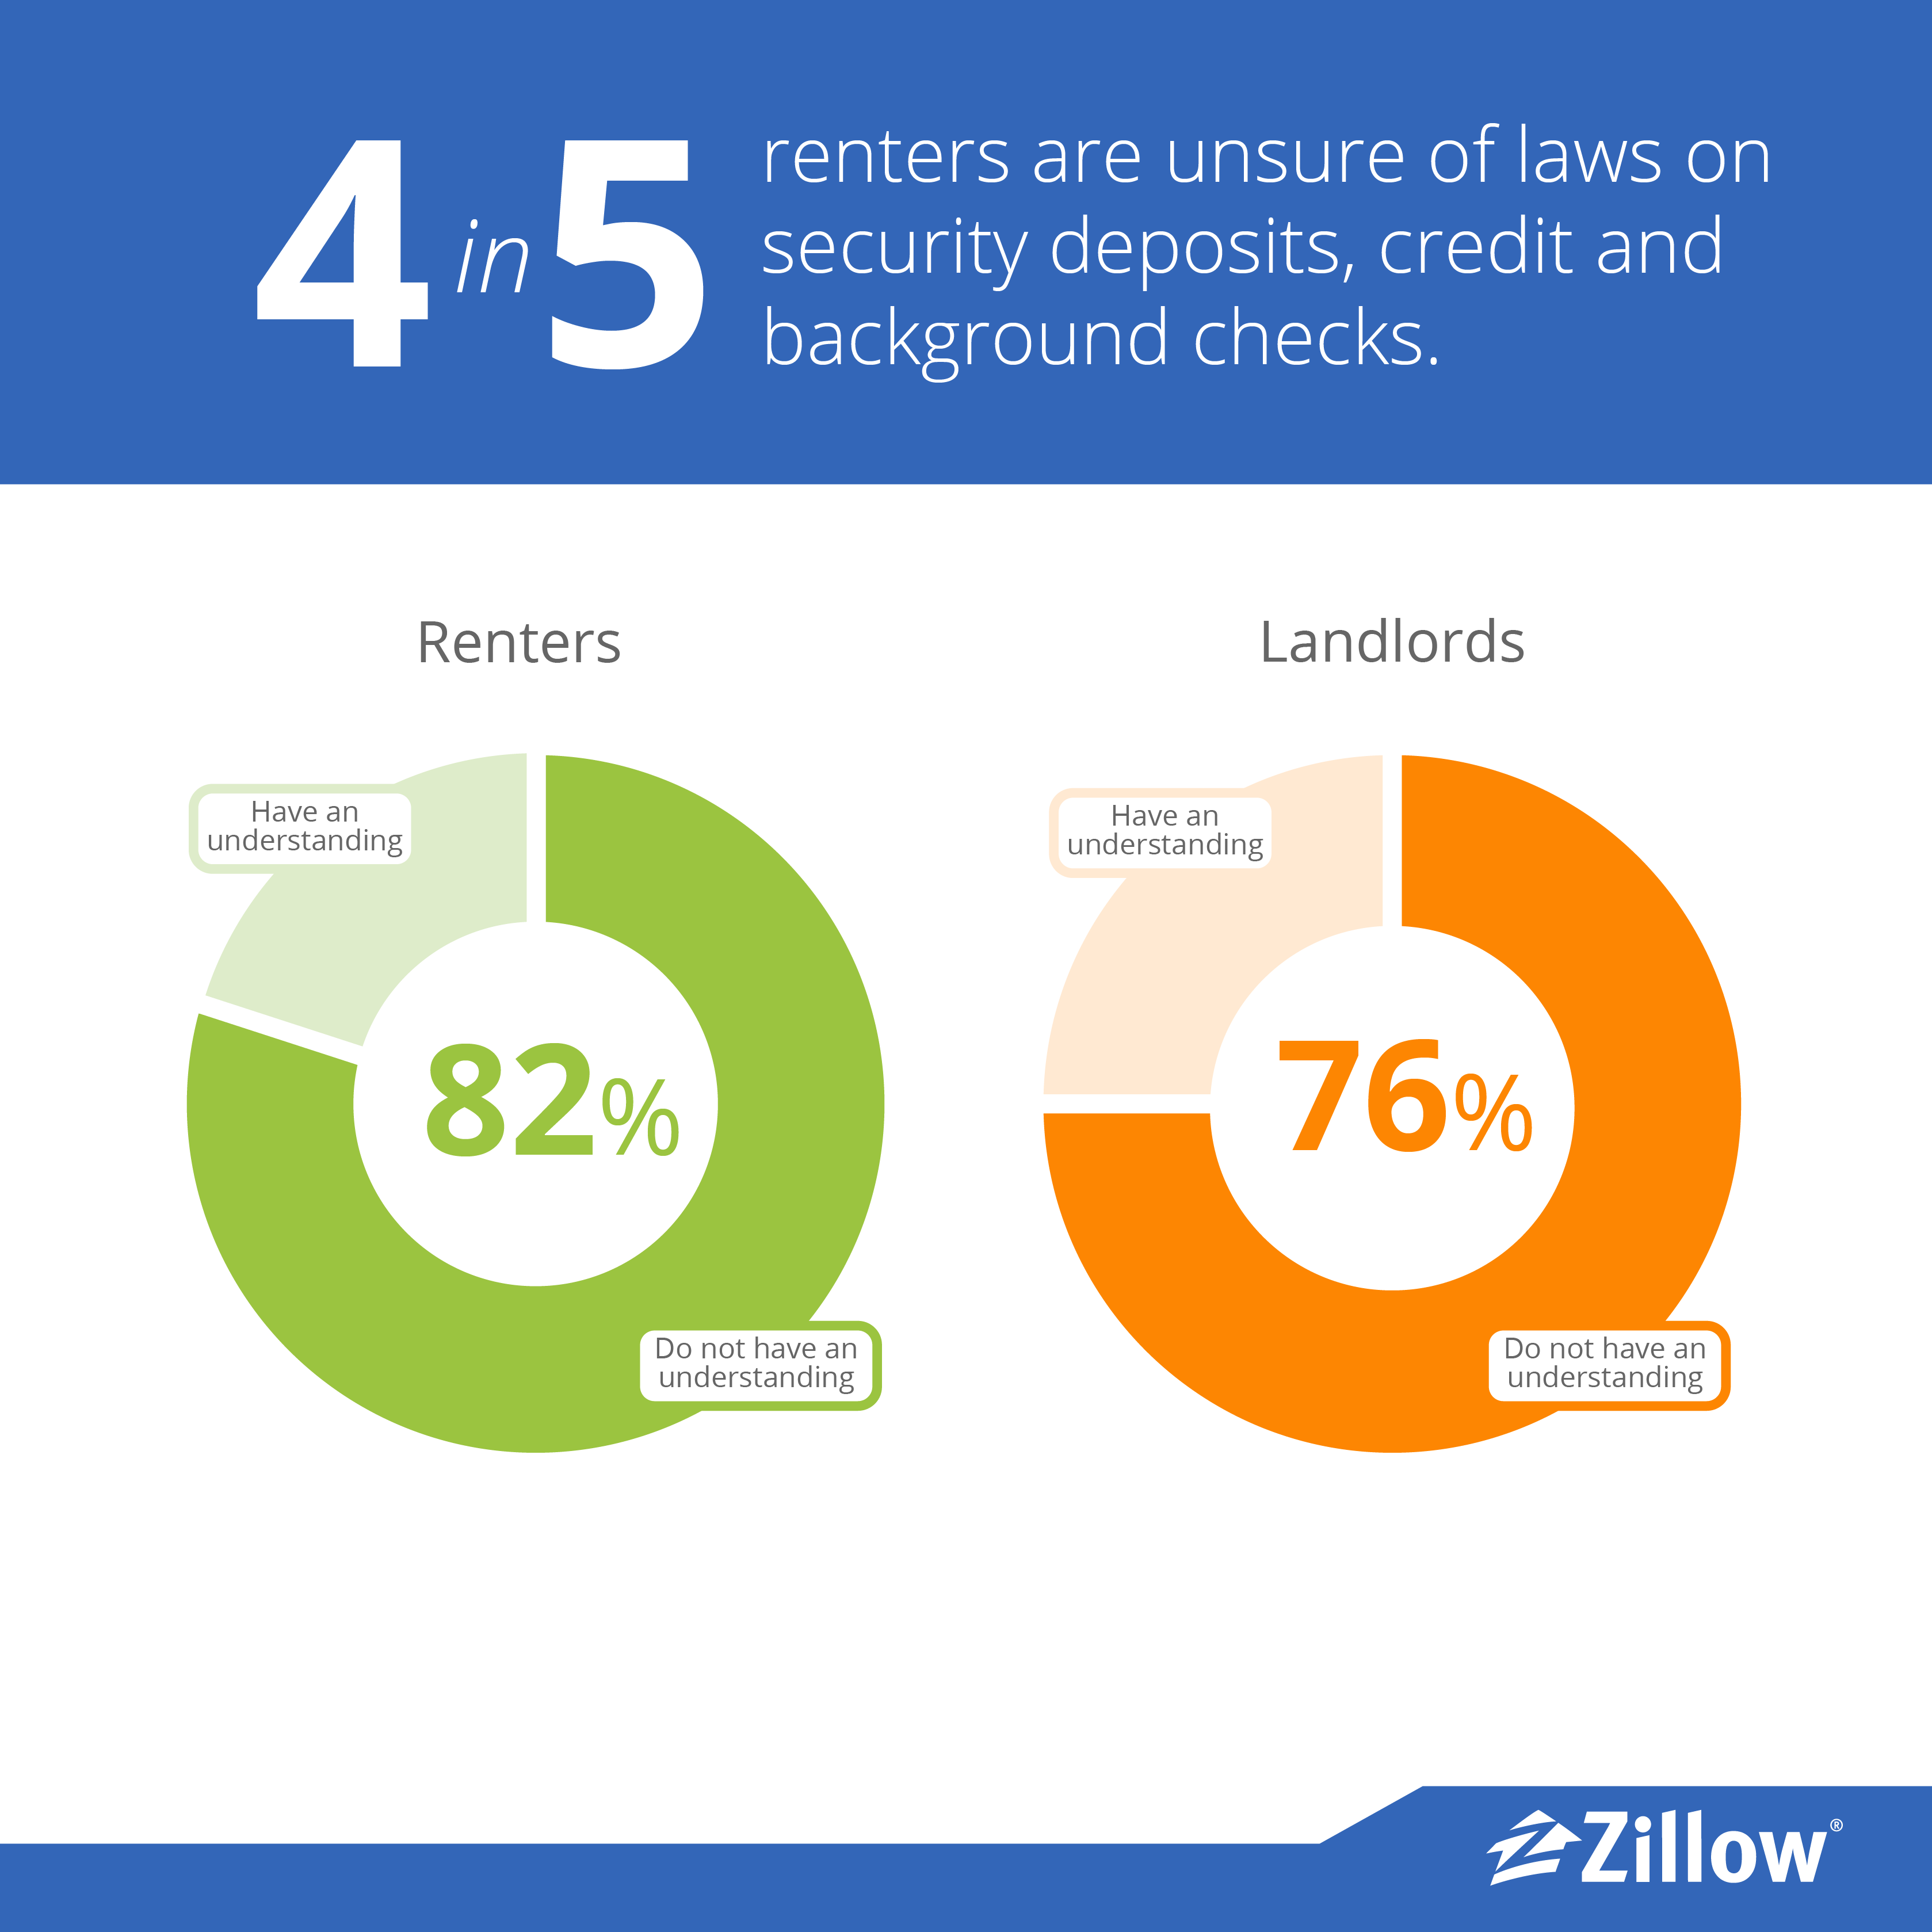 4 in 5 renters lack understanding of laws on security deposits, credit and background checks